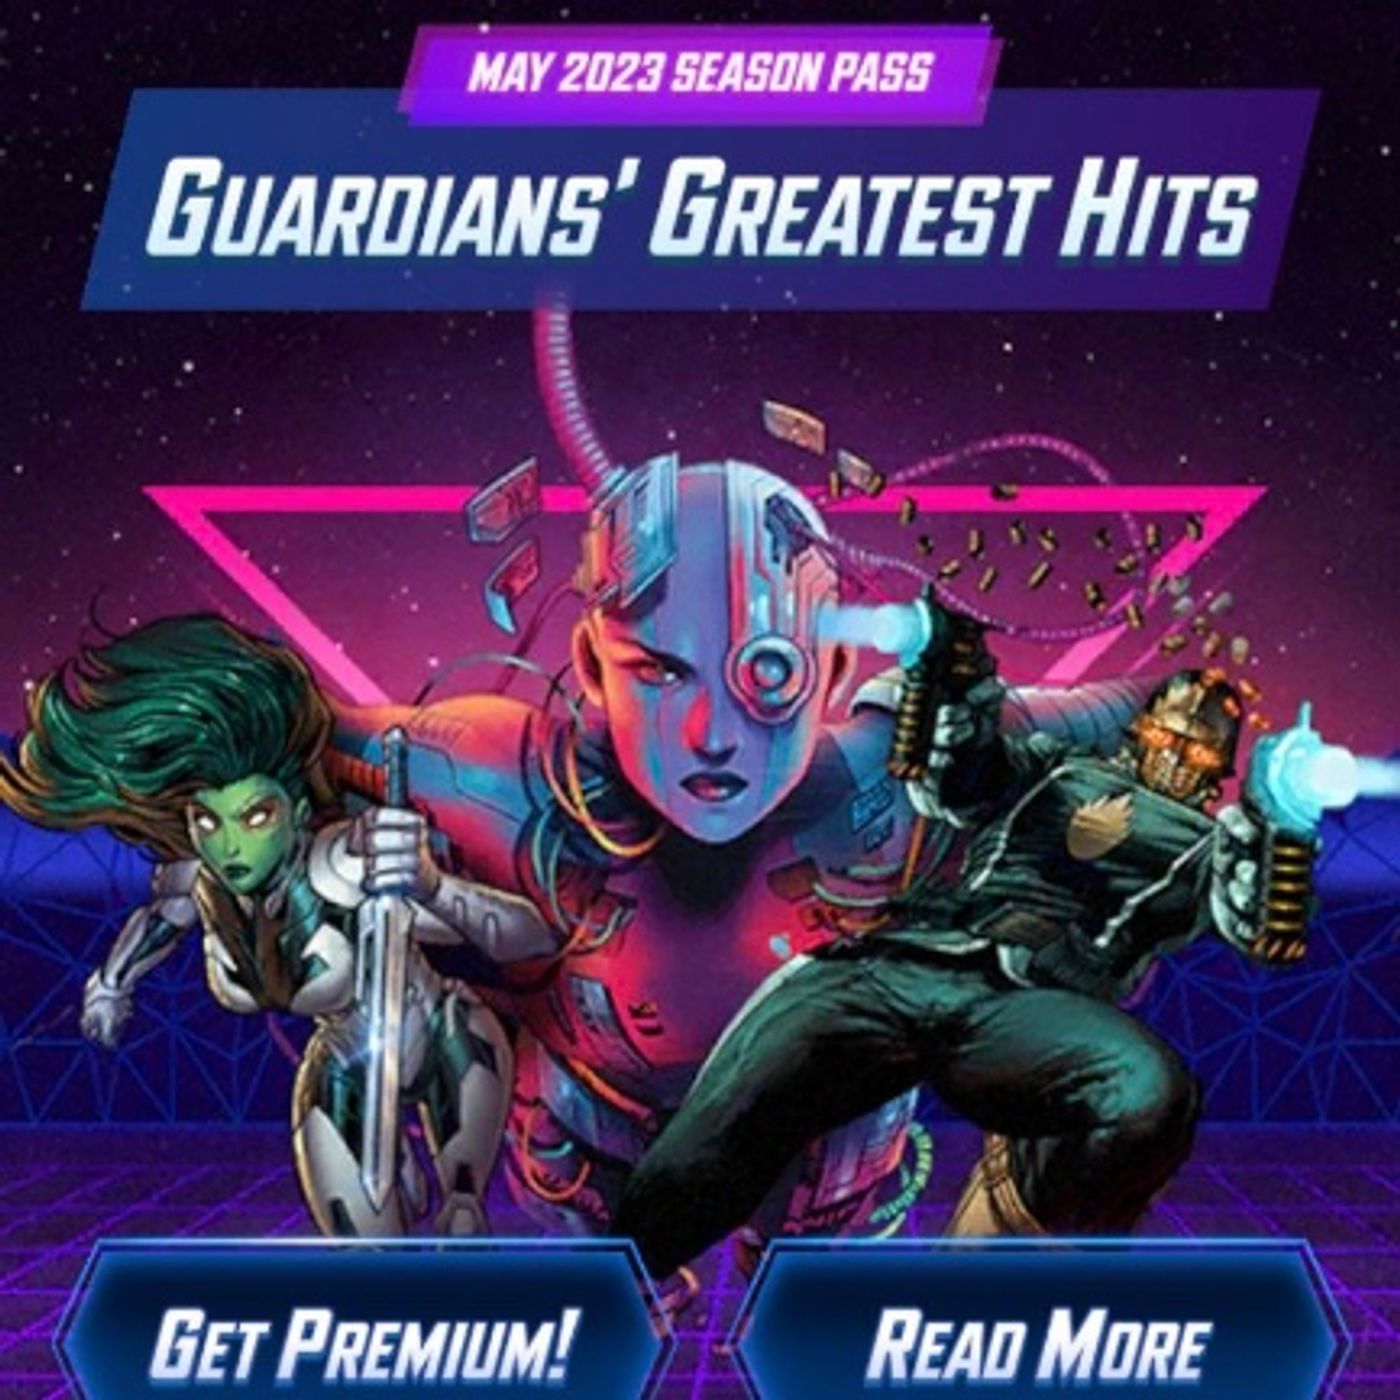 SNAP Material - “The Guardians Greatest Hits” Preview